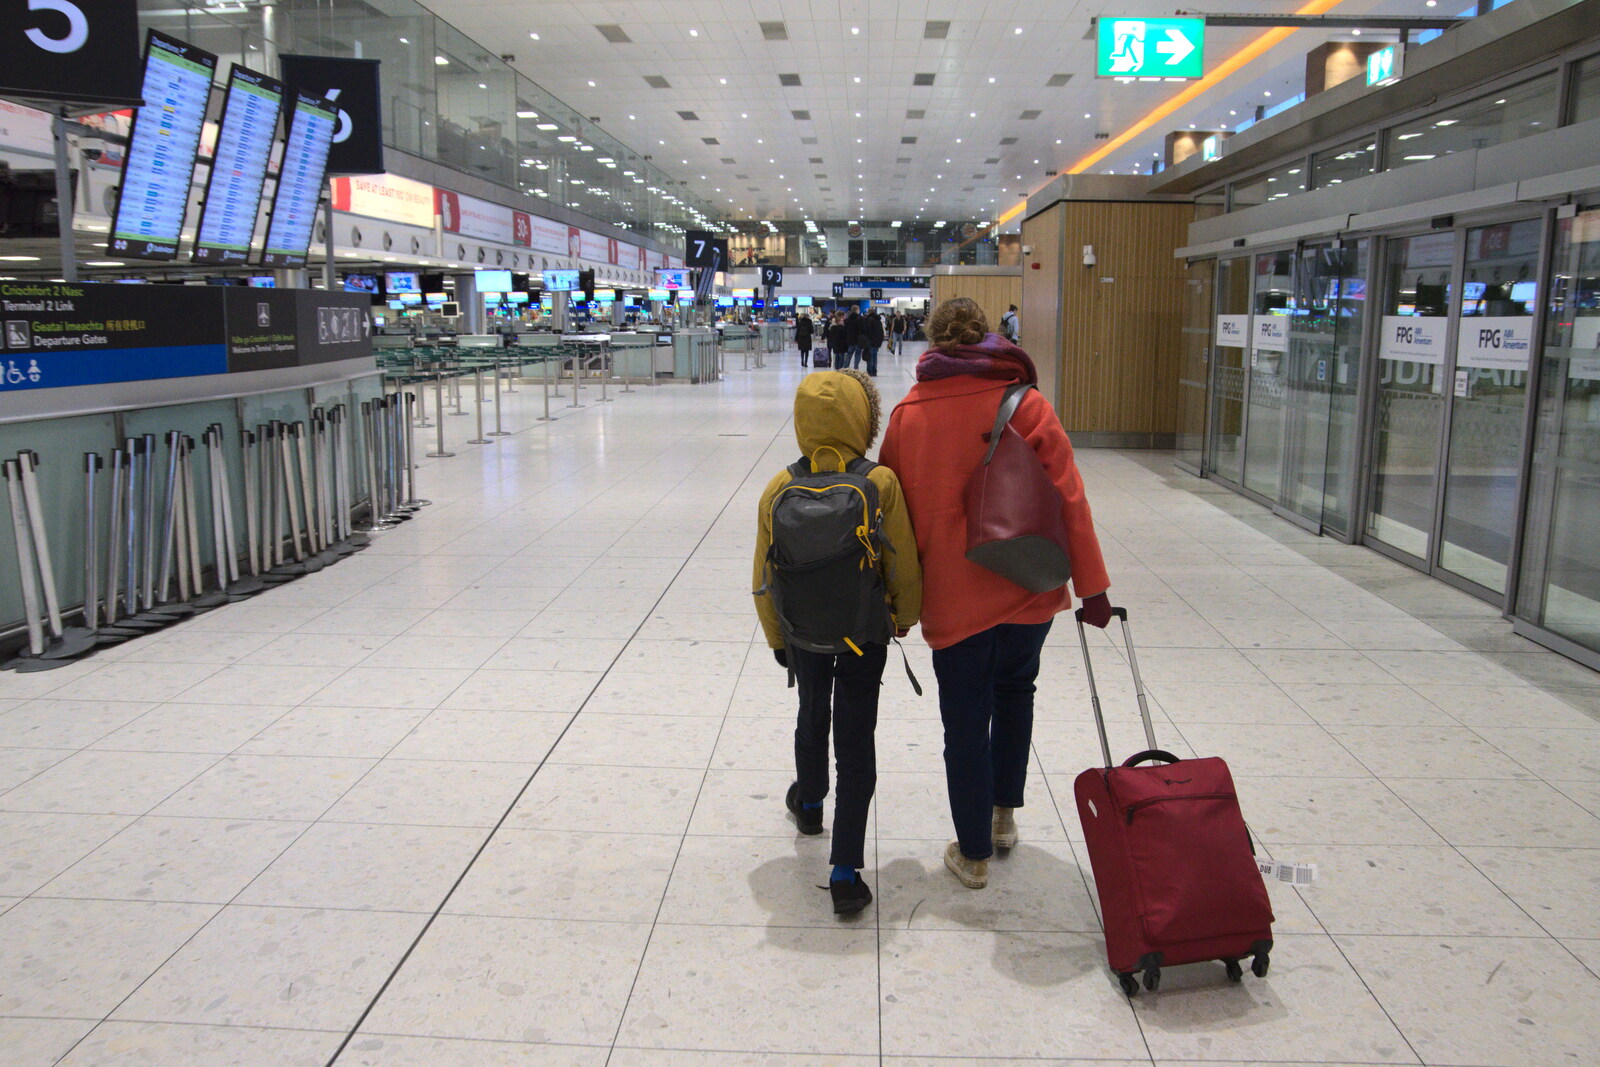 The End of the Breffni, Blackrock, Dublin - 18th February 2023: Harry and Isobel in Dublin Airport's Terminal 1